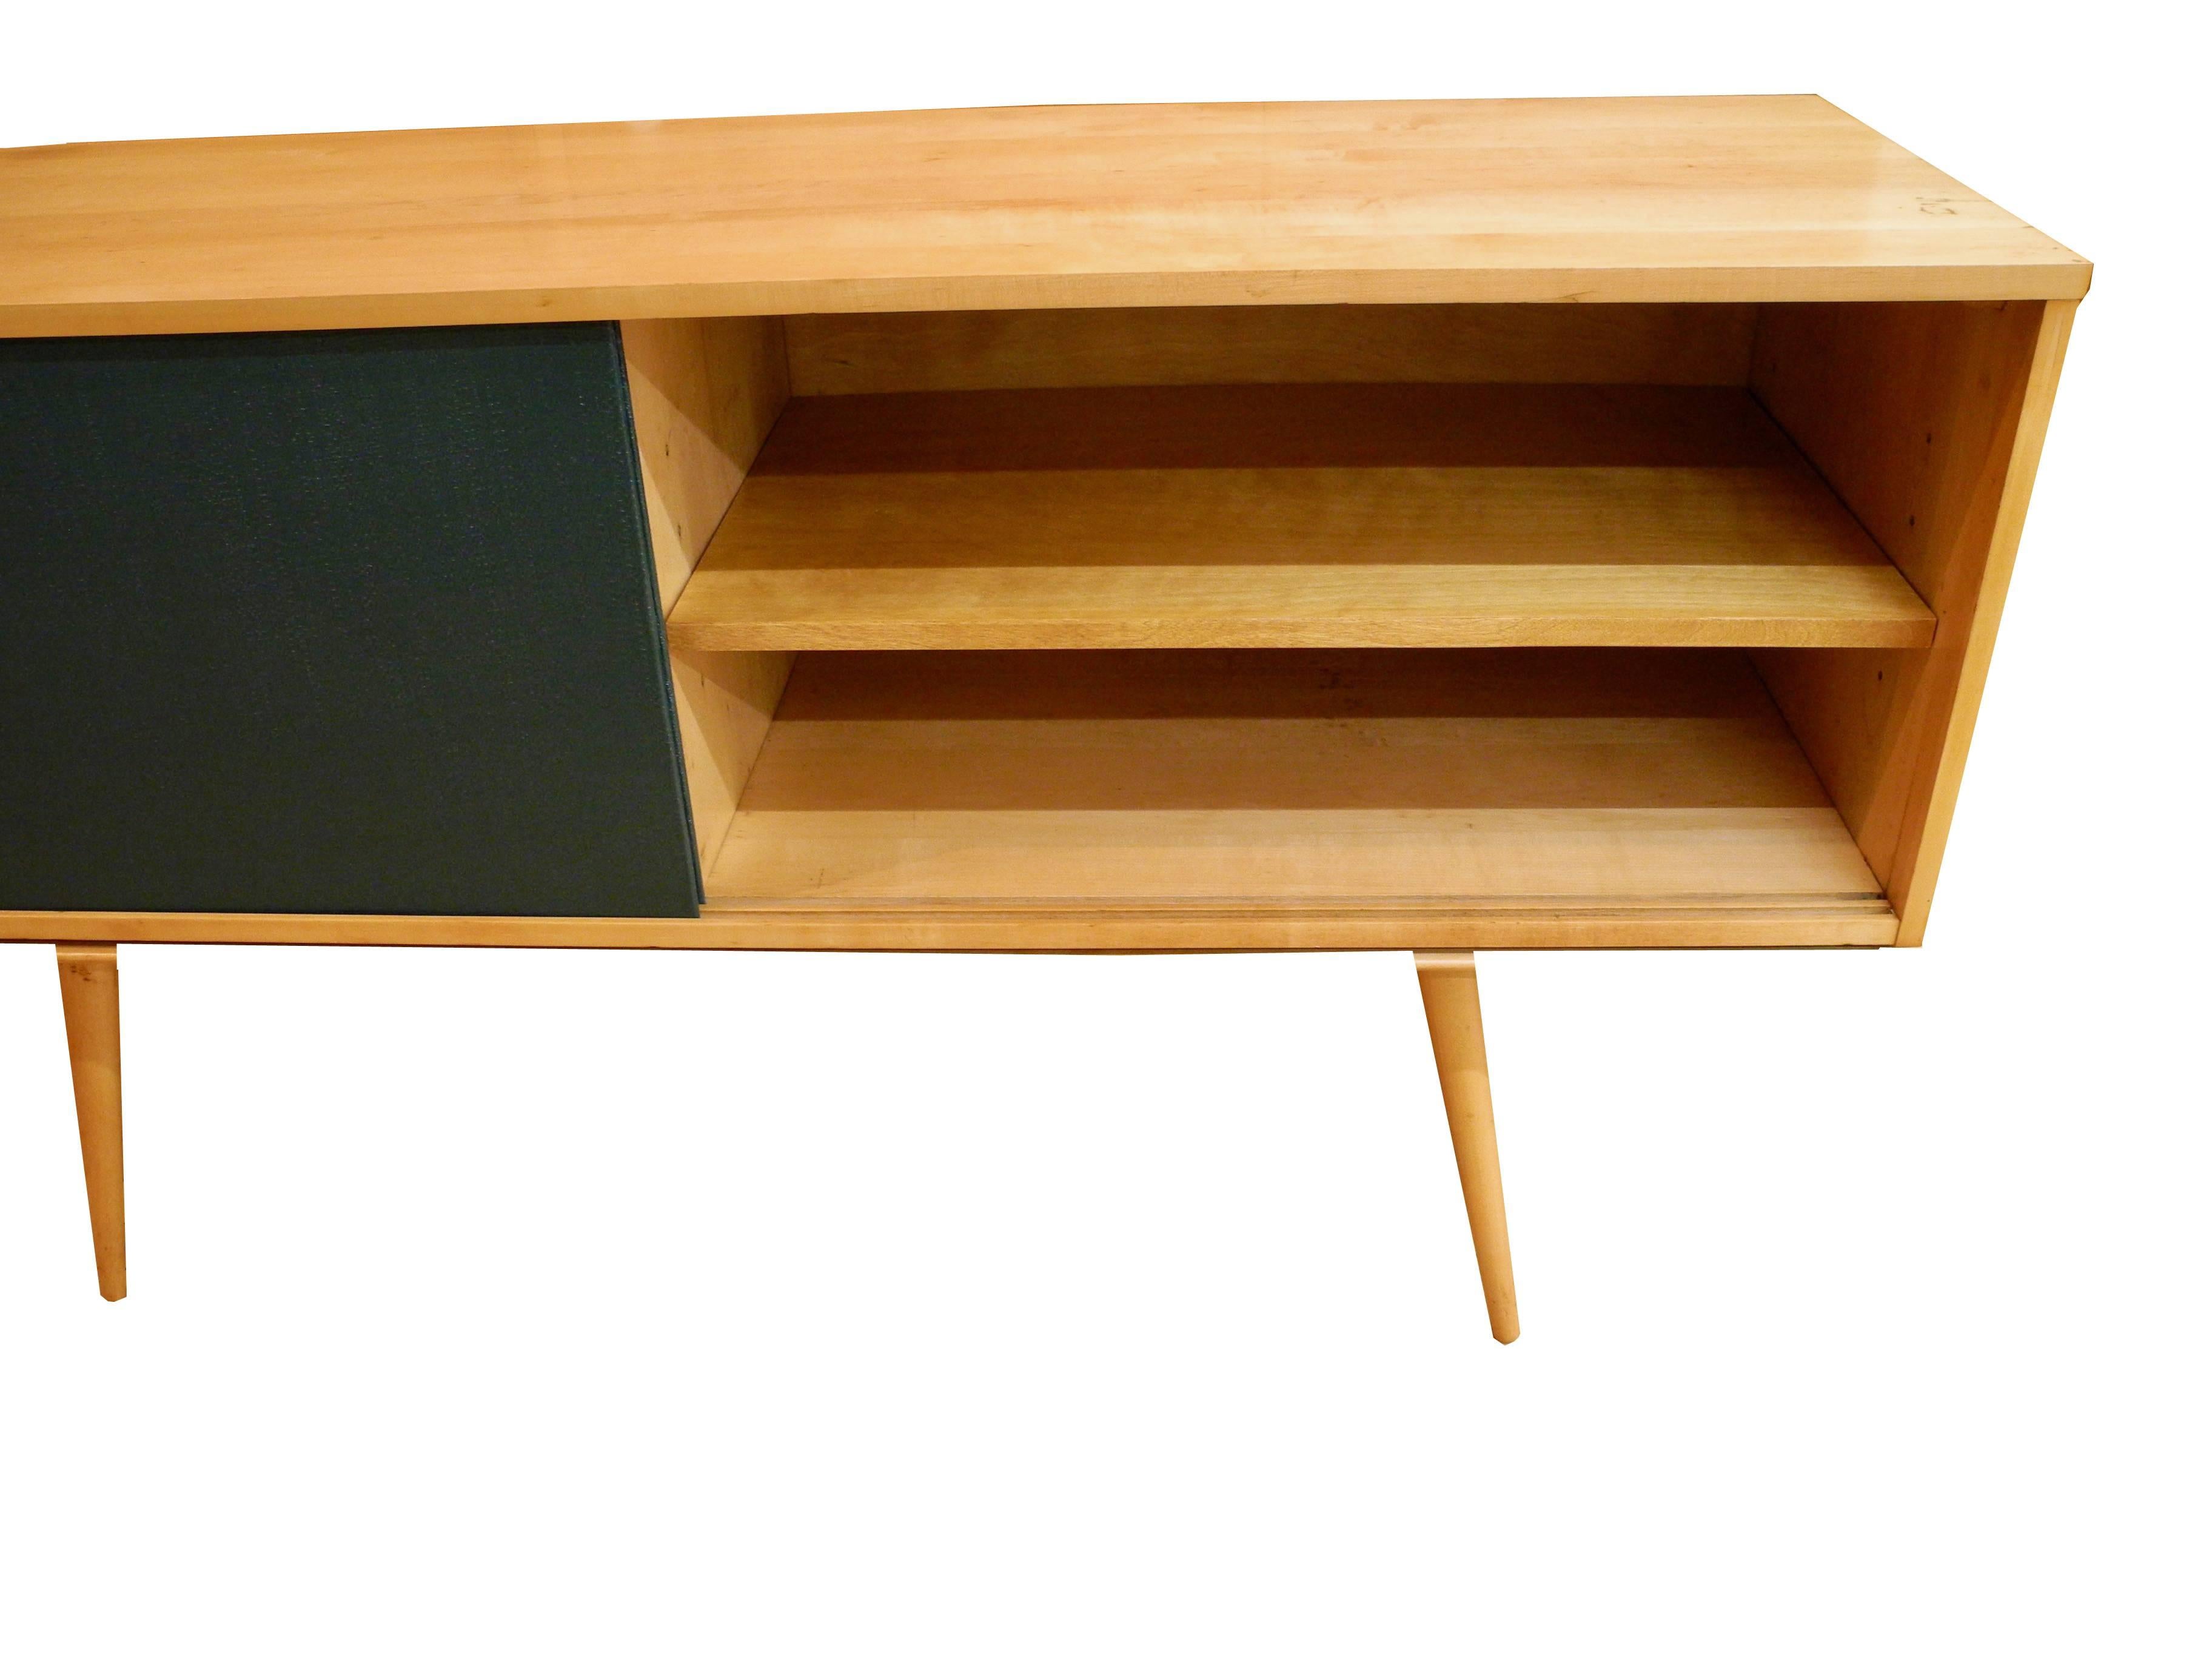 American Mid-Century Modern Maple Credenza / Sideboard Designed by Paul McCobb